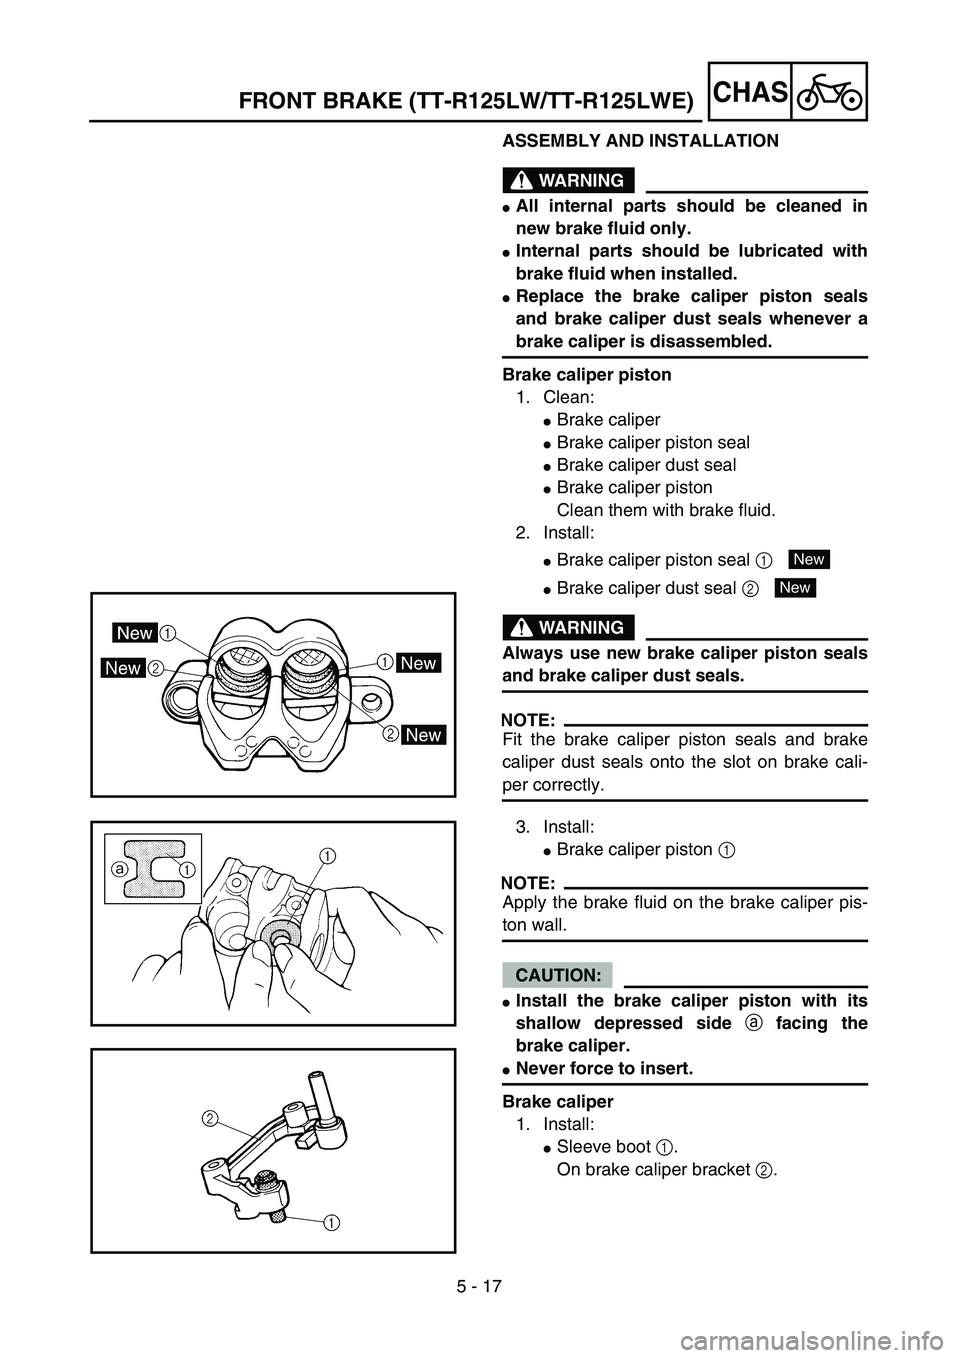 YAMAHA TTR125 2006  Owners Manual 5 - 17
CHASFRONT BRAKE (TT-R125LW/TT-R125LWE)
ASSEMBLY AND INSTALLATION
WARNING
All internal parts should be cleaned in
new brake fluid only.
Internal parts should be lubricated with
brake fluid whe